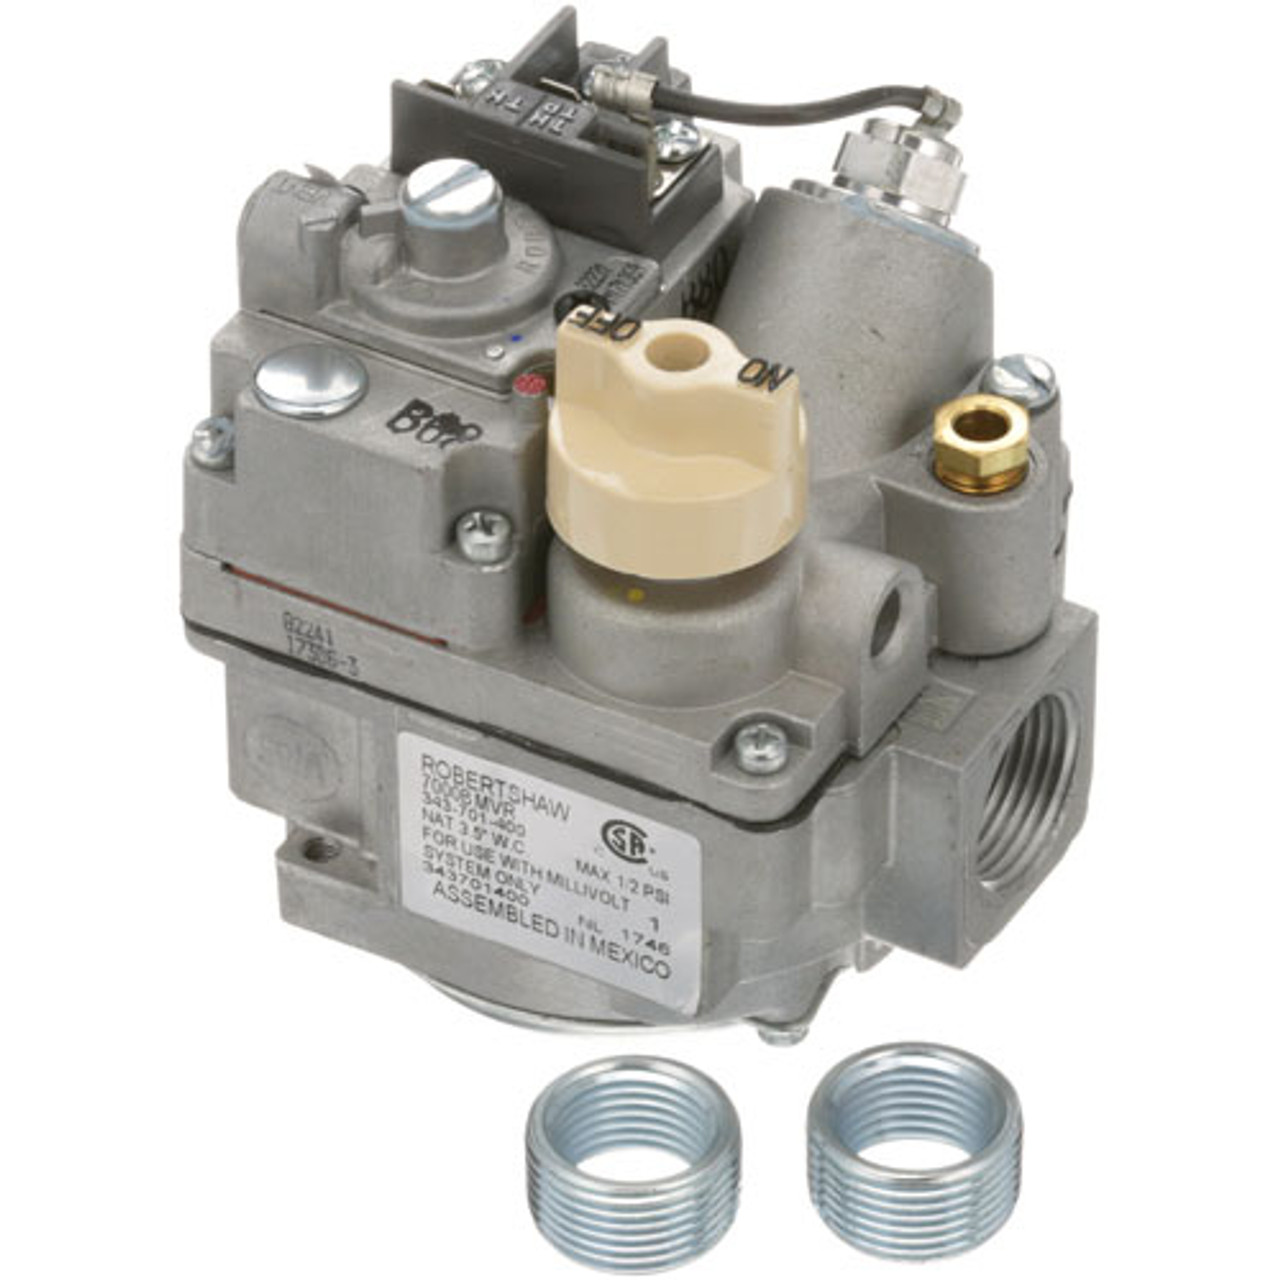 Gas Control - Replacement Part For Hobart 110841-23